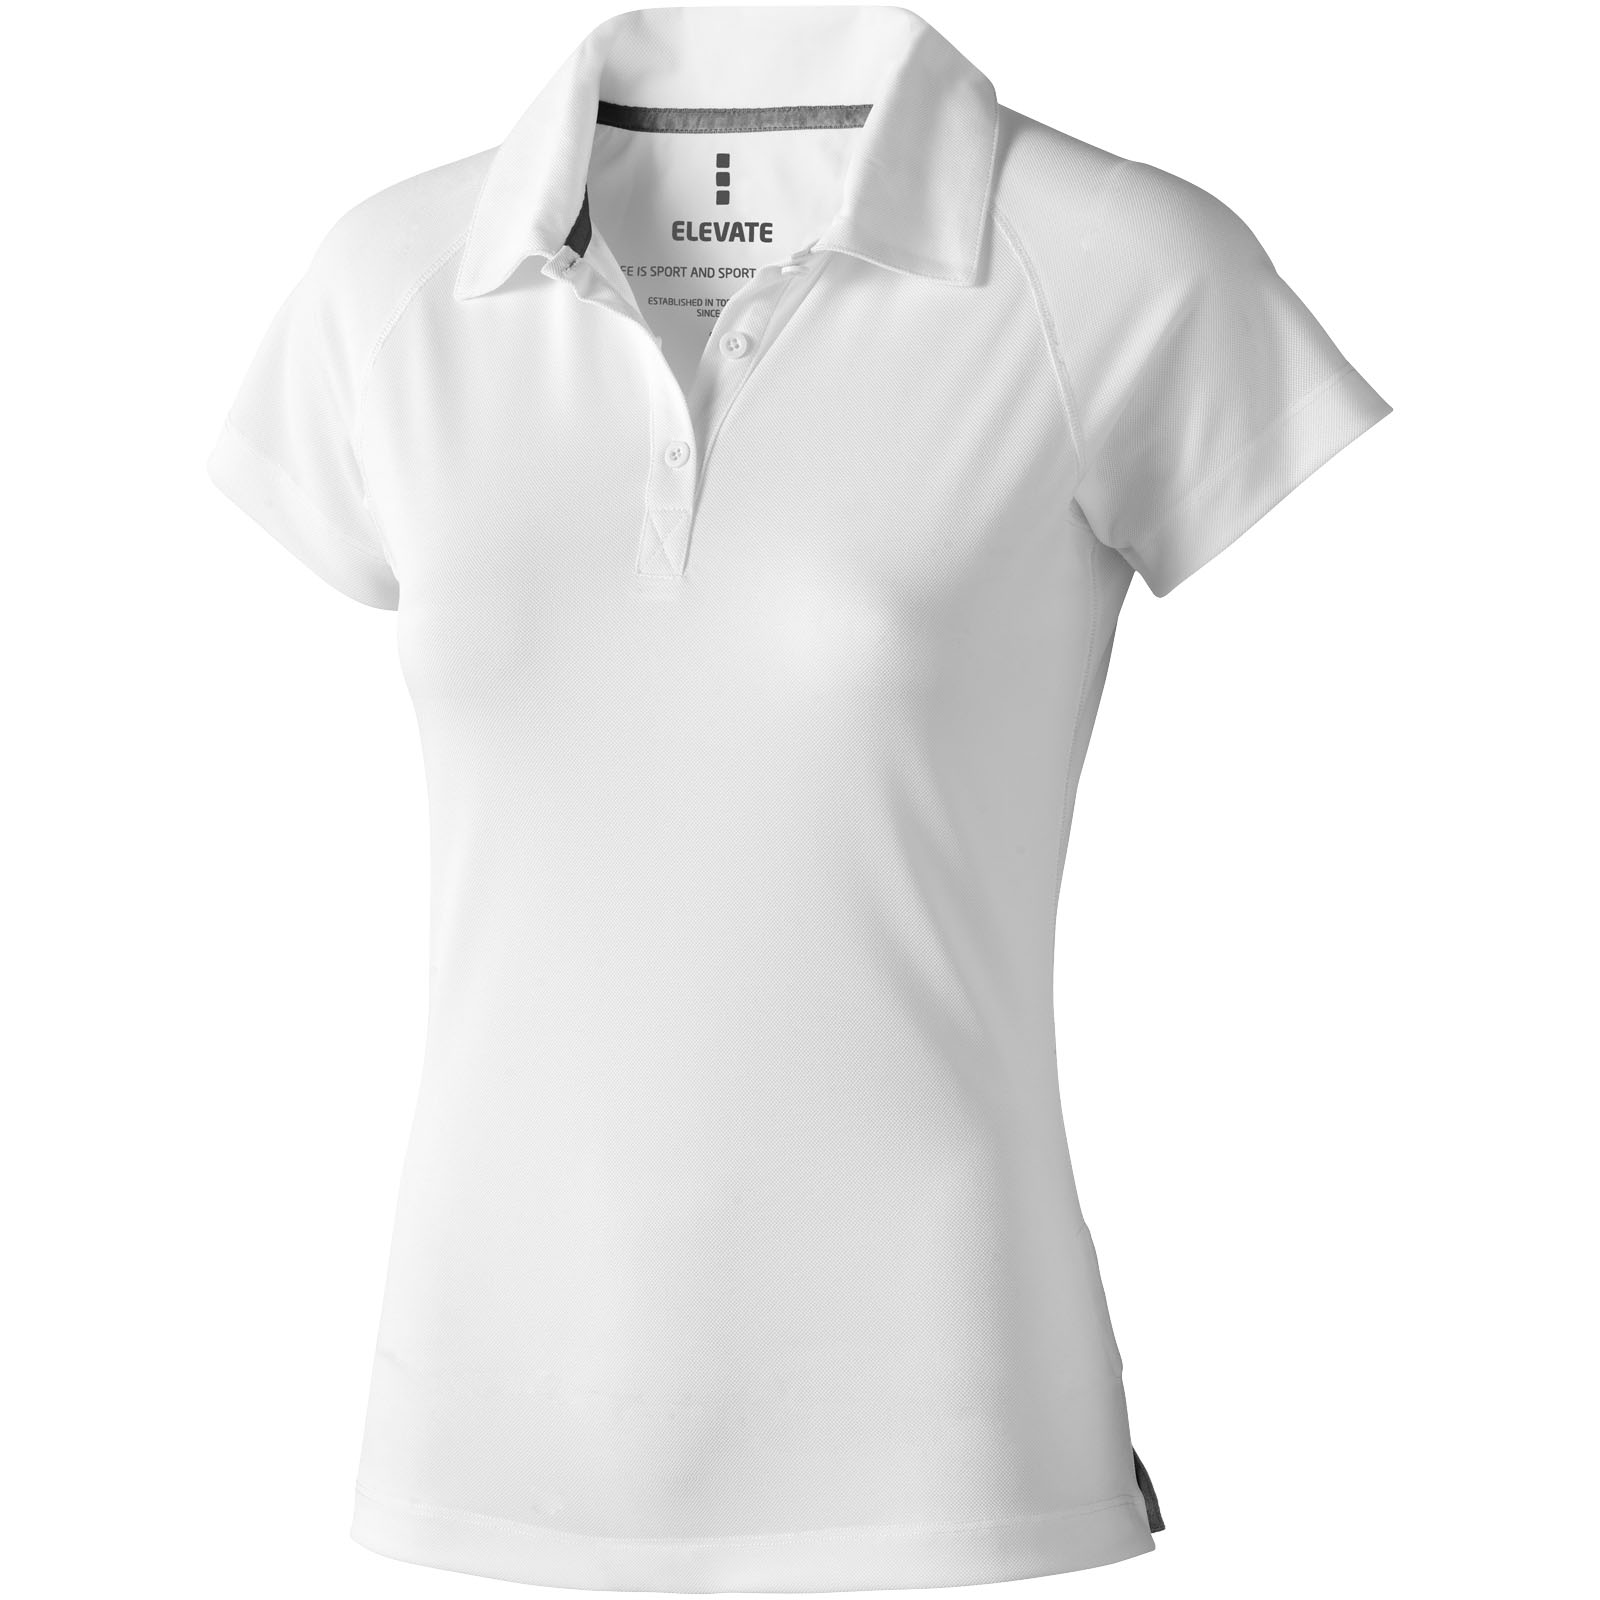 Advertising Polos - Ottawa short sleeve women's cool fit polo